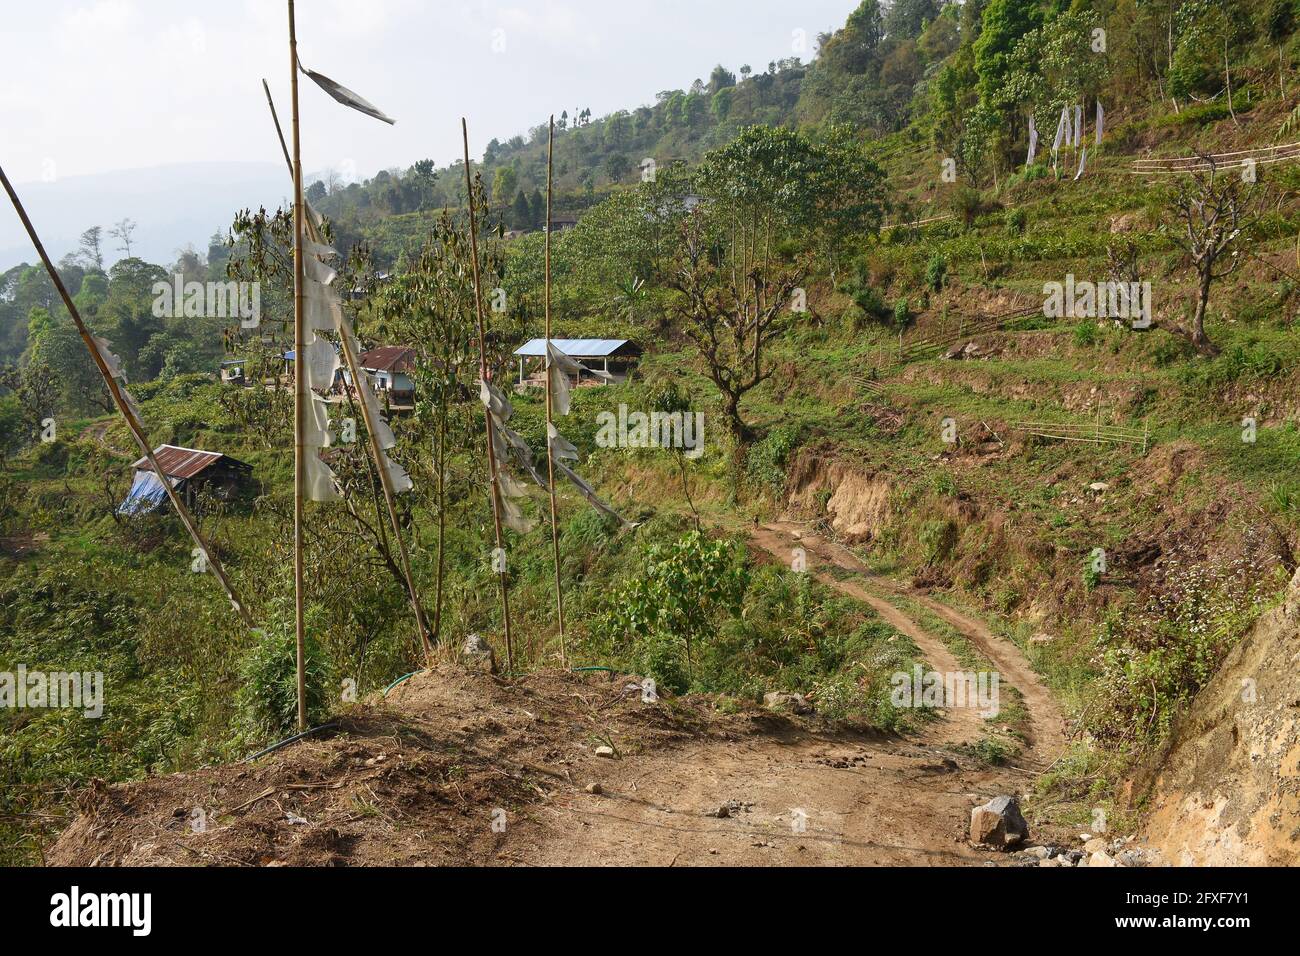 Remote village with Cultivation of Amomum subulatum commonly known as large cardamom, in Todey ,Kalimpong. Stock Photo